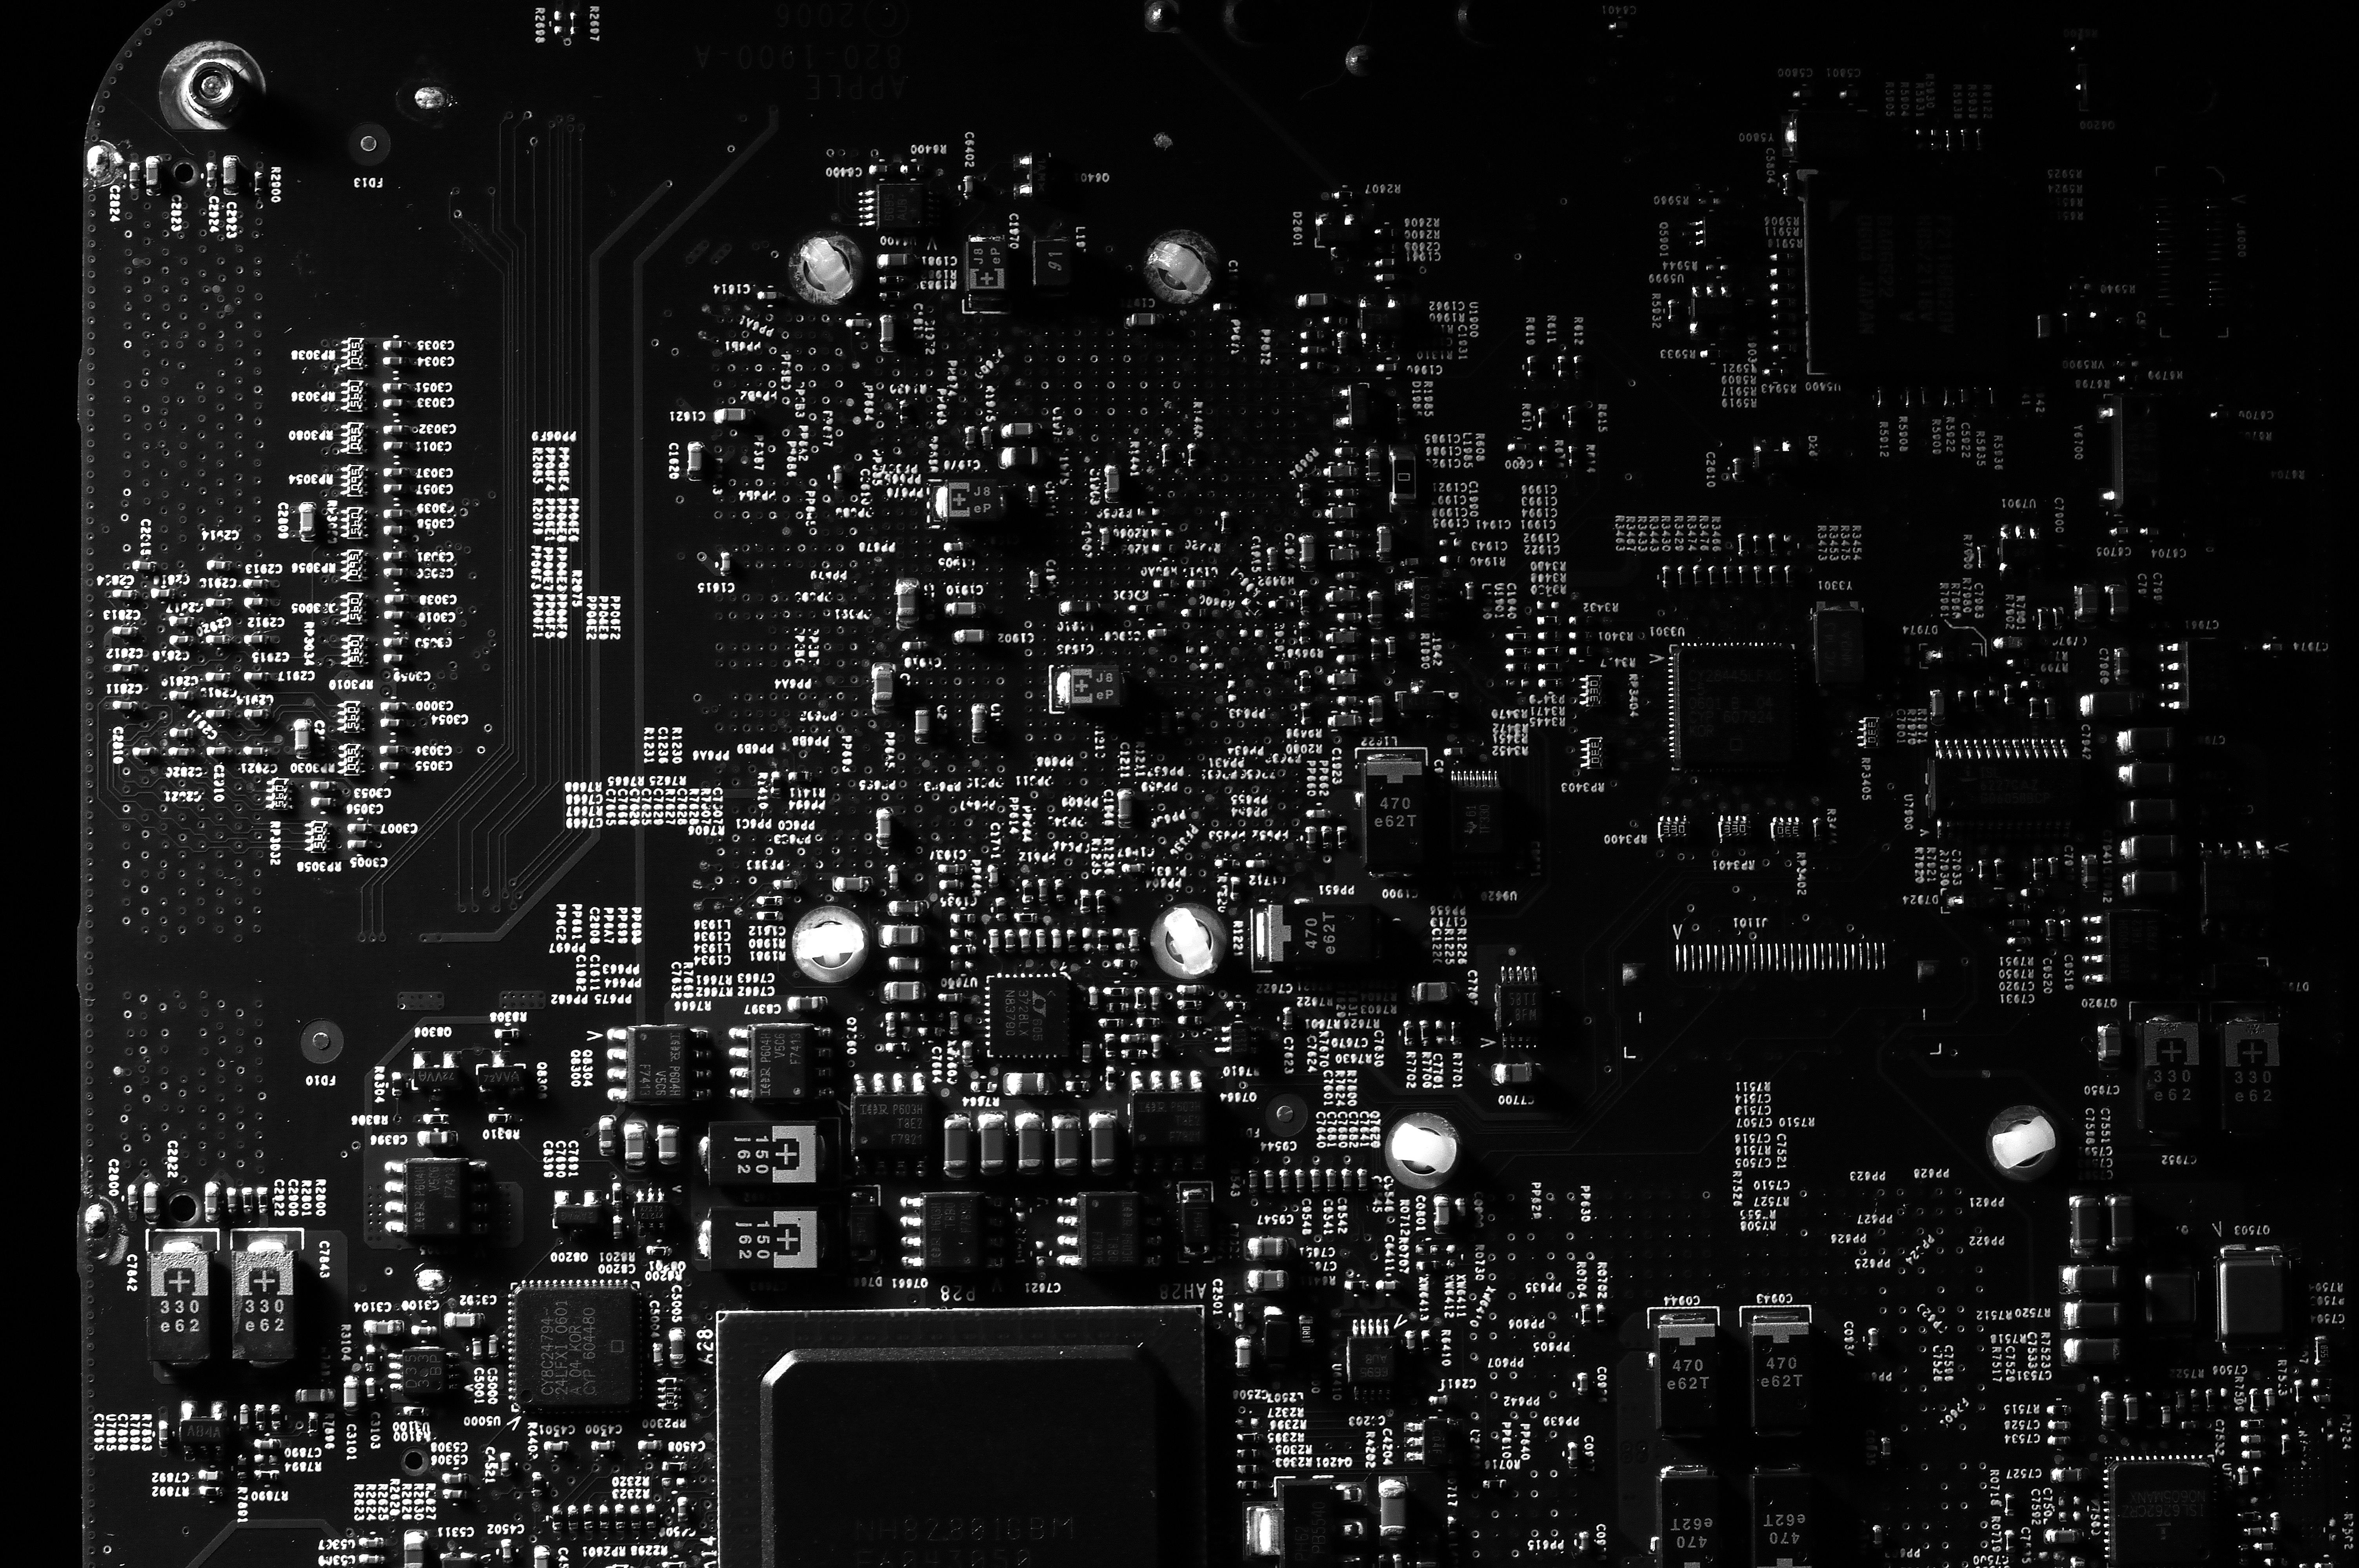 Motherboard Photos, Download The BEST Free Motherboard Stock Photos & HD  Images